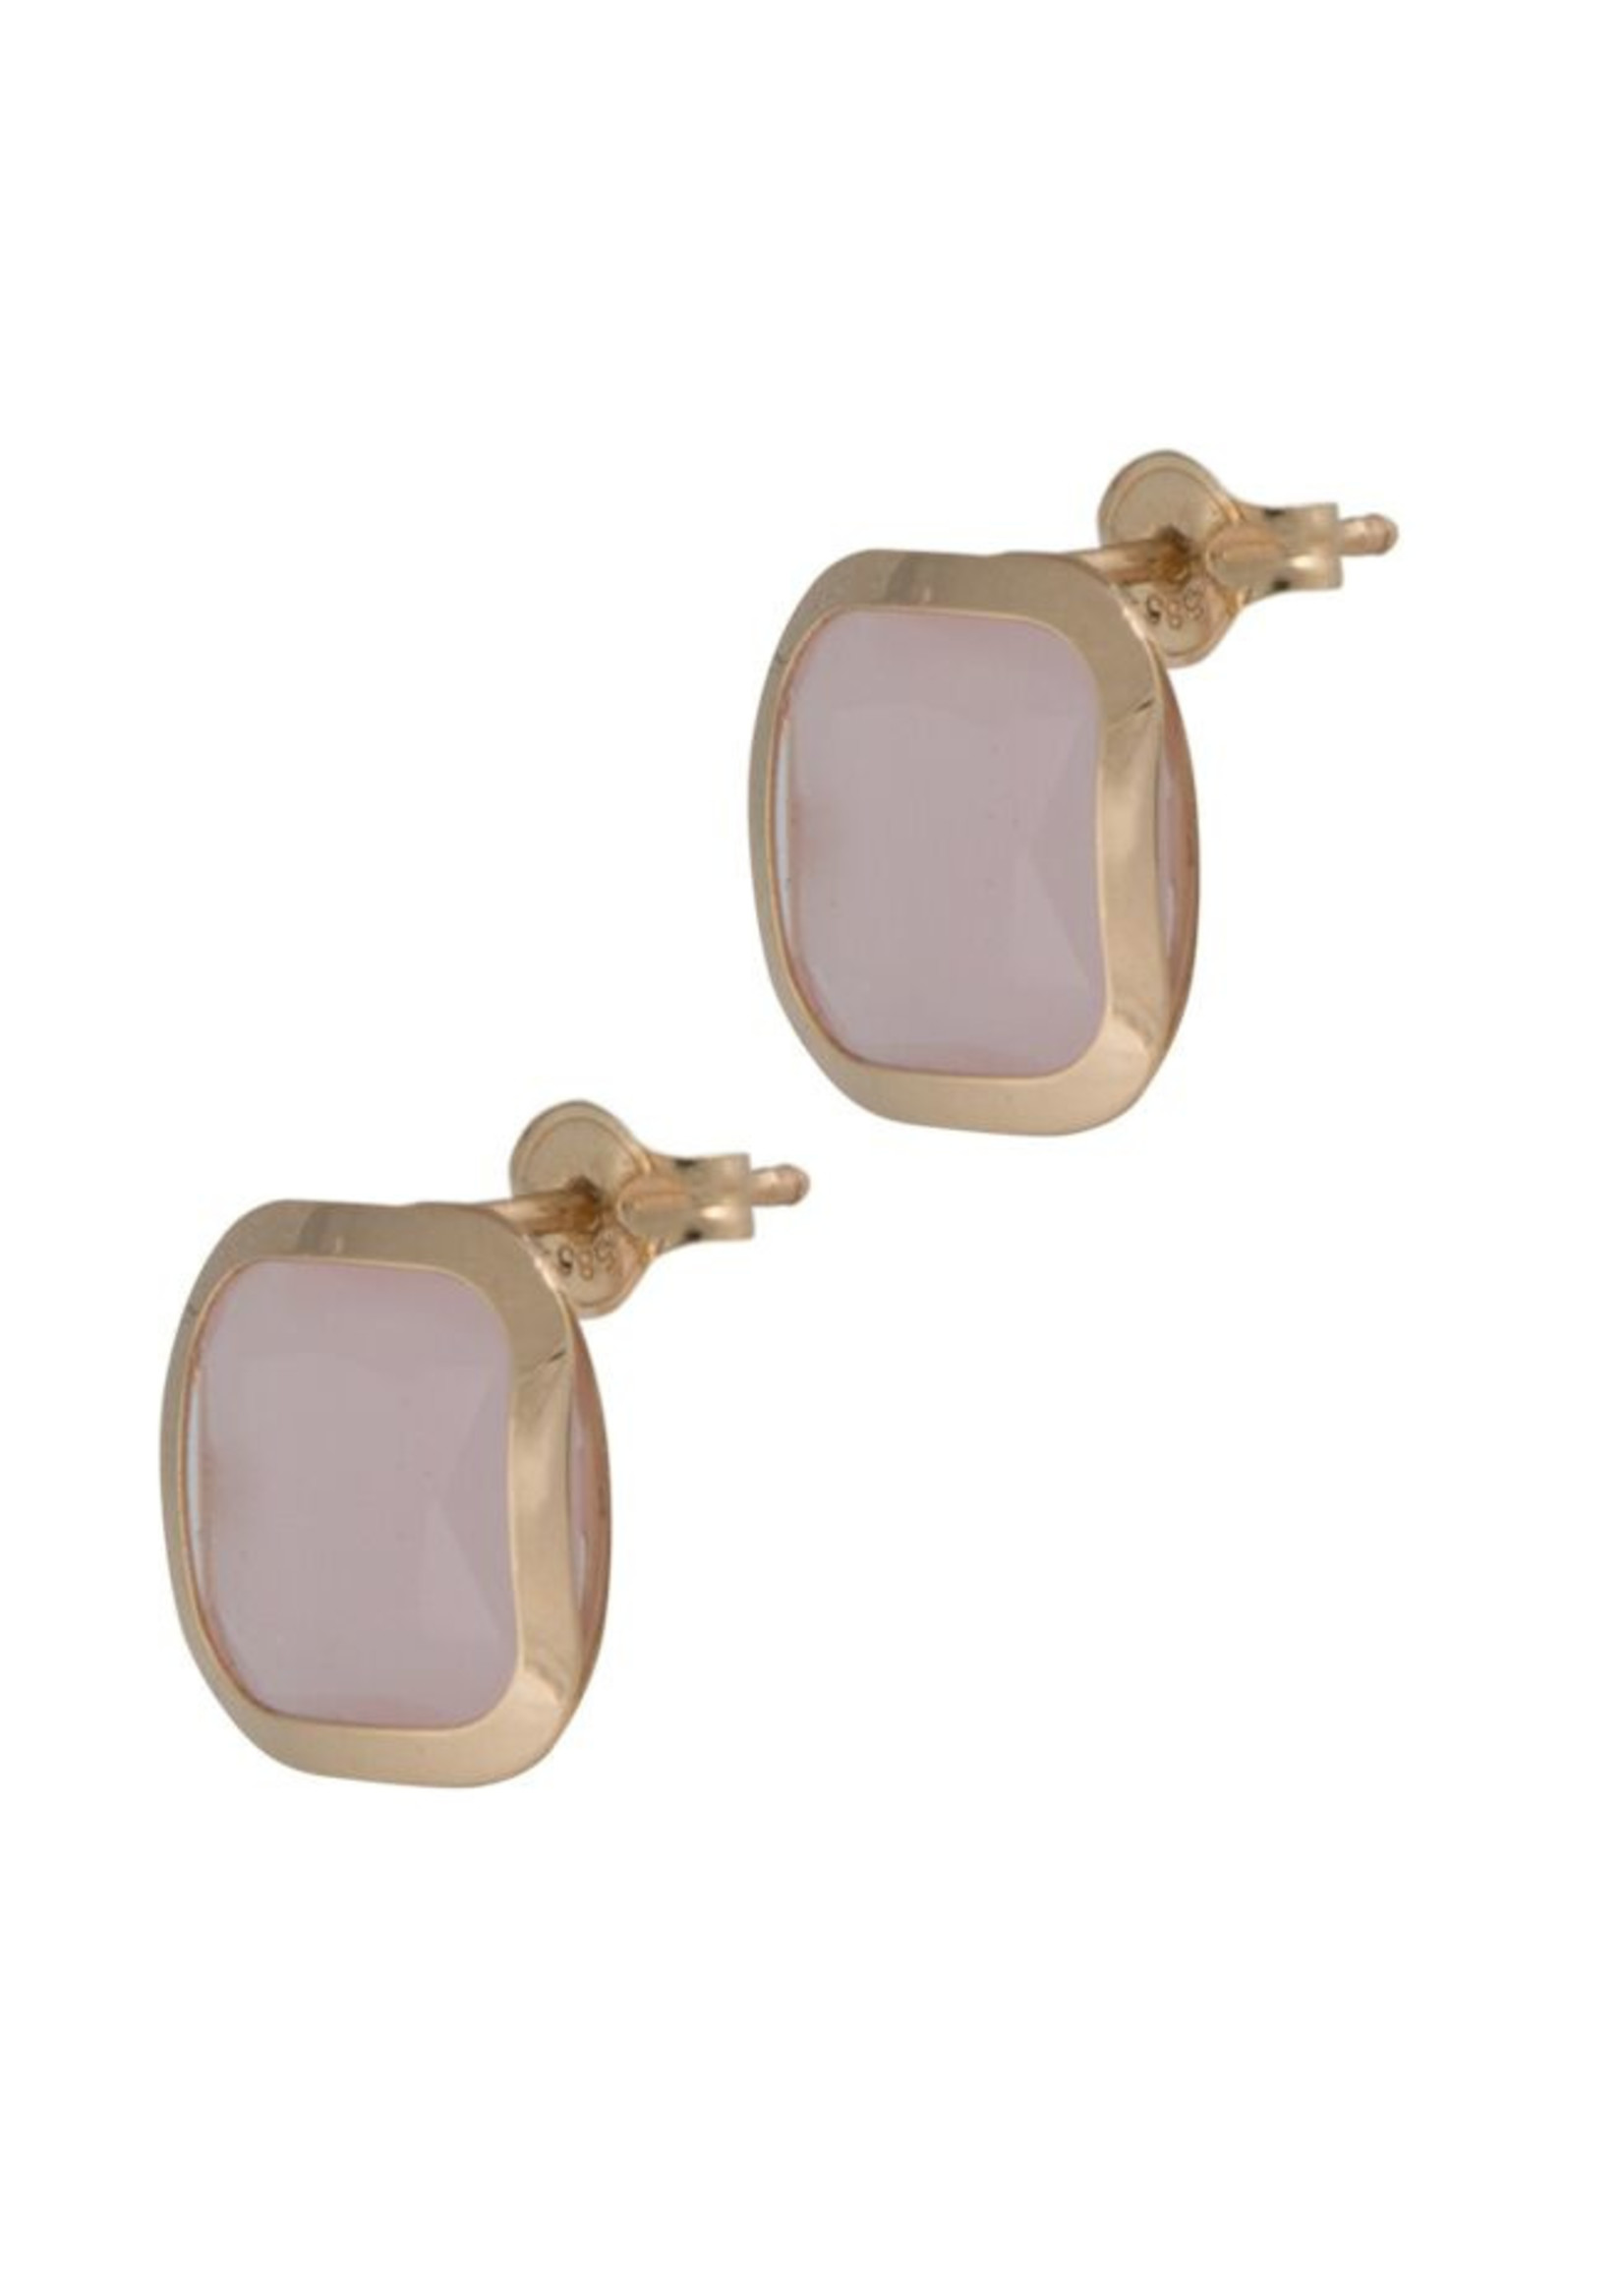 Vintage & Occasion Cataleya Earrings Square Pink